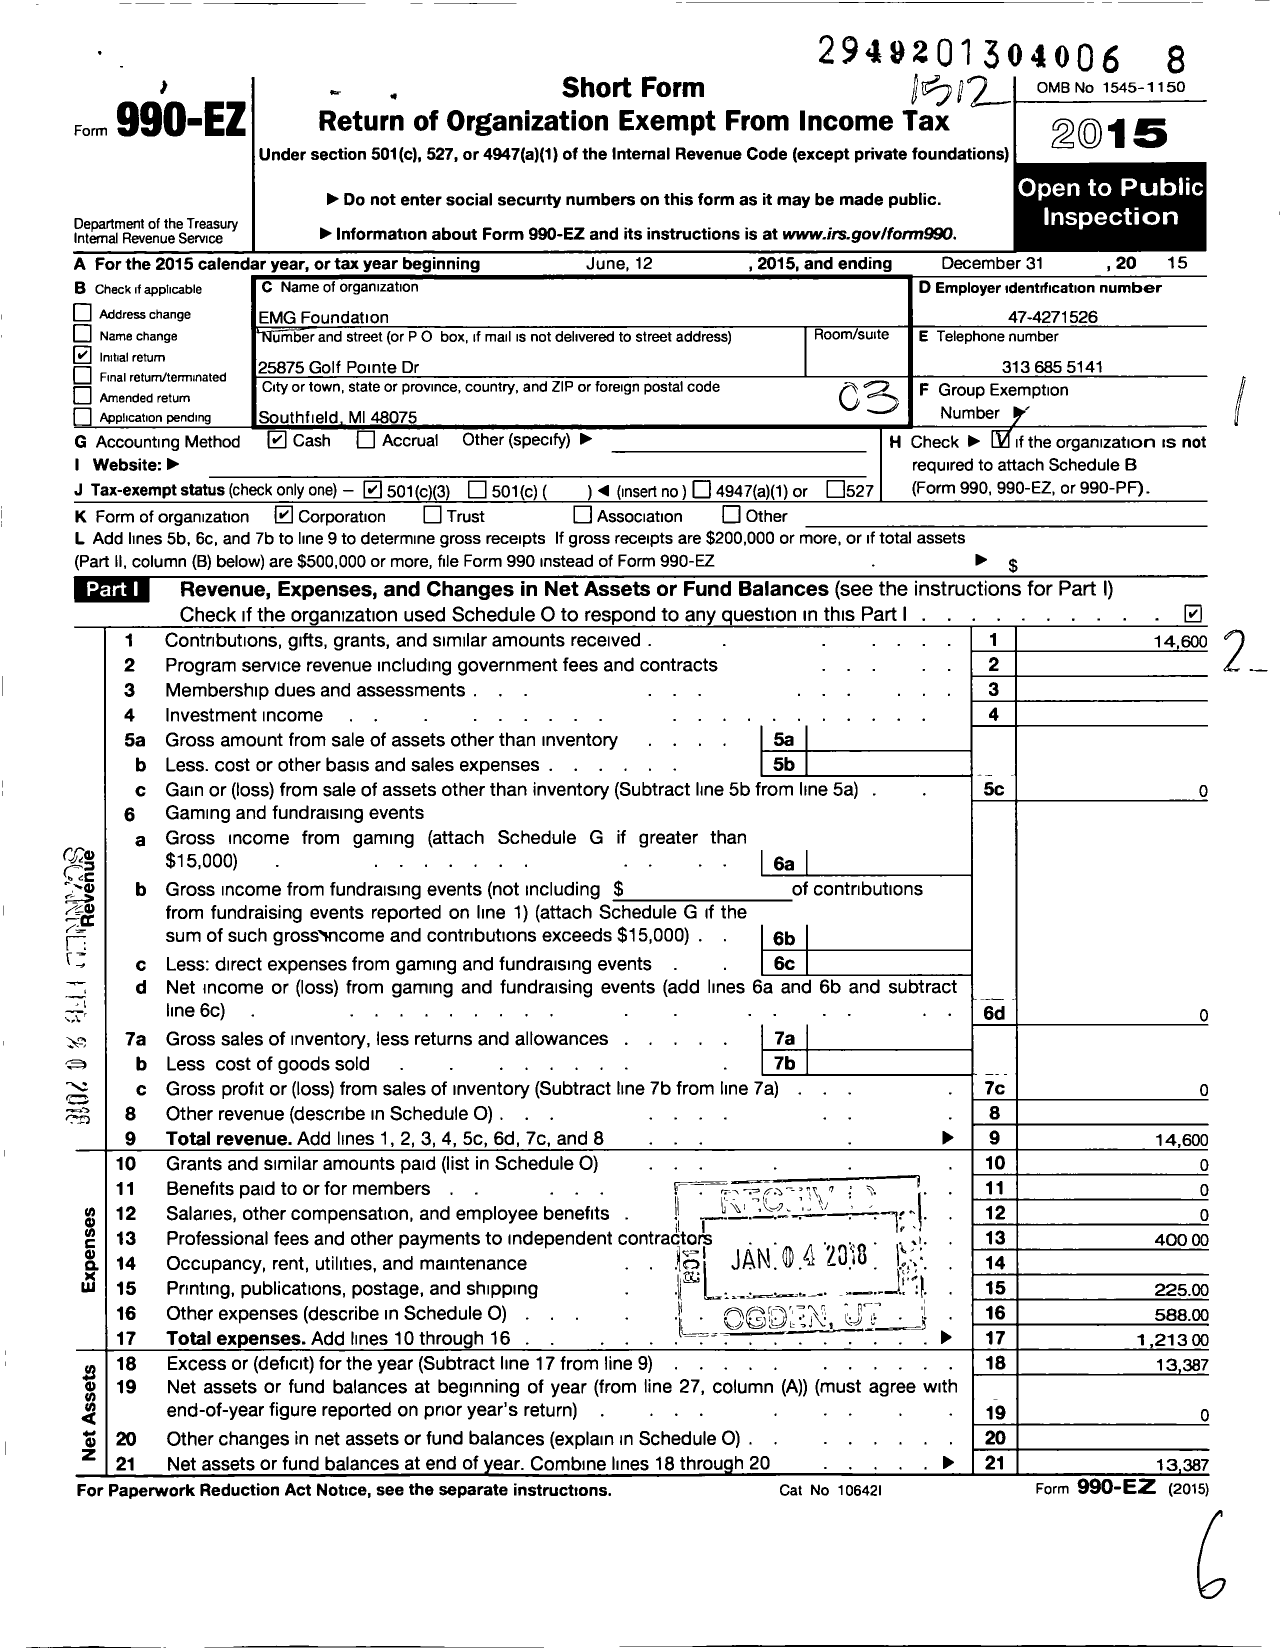 Image of first page of 2015 Form 990EZ for Emg Foundation